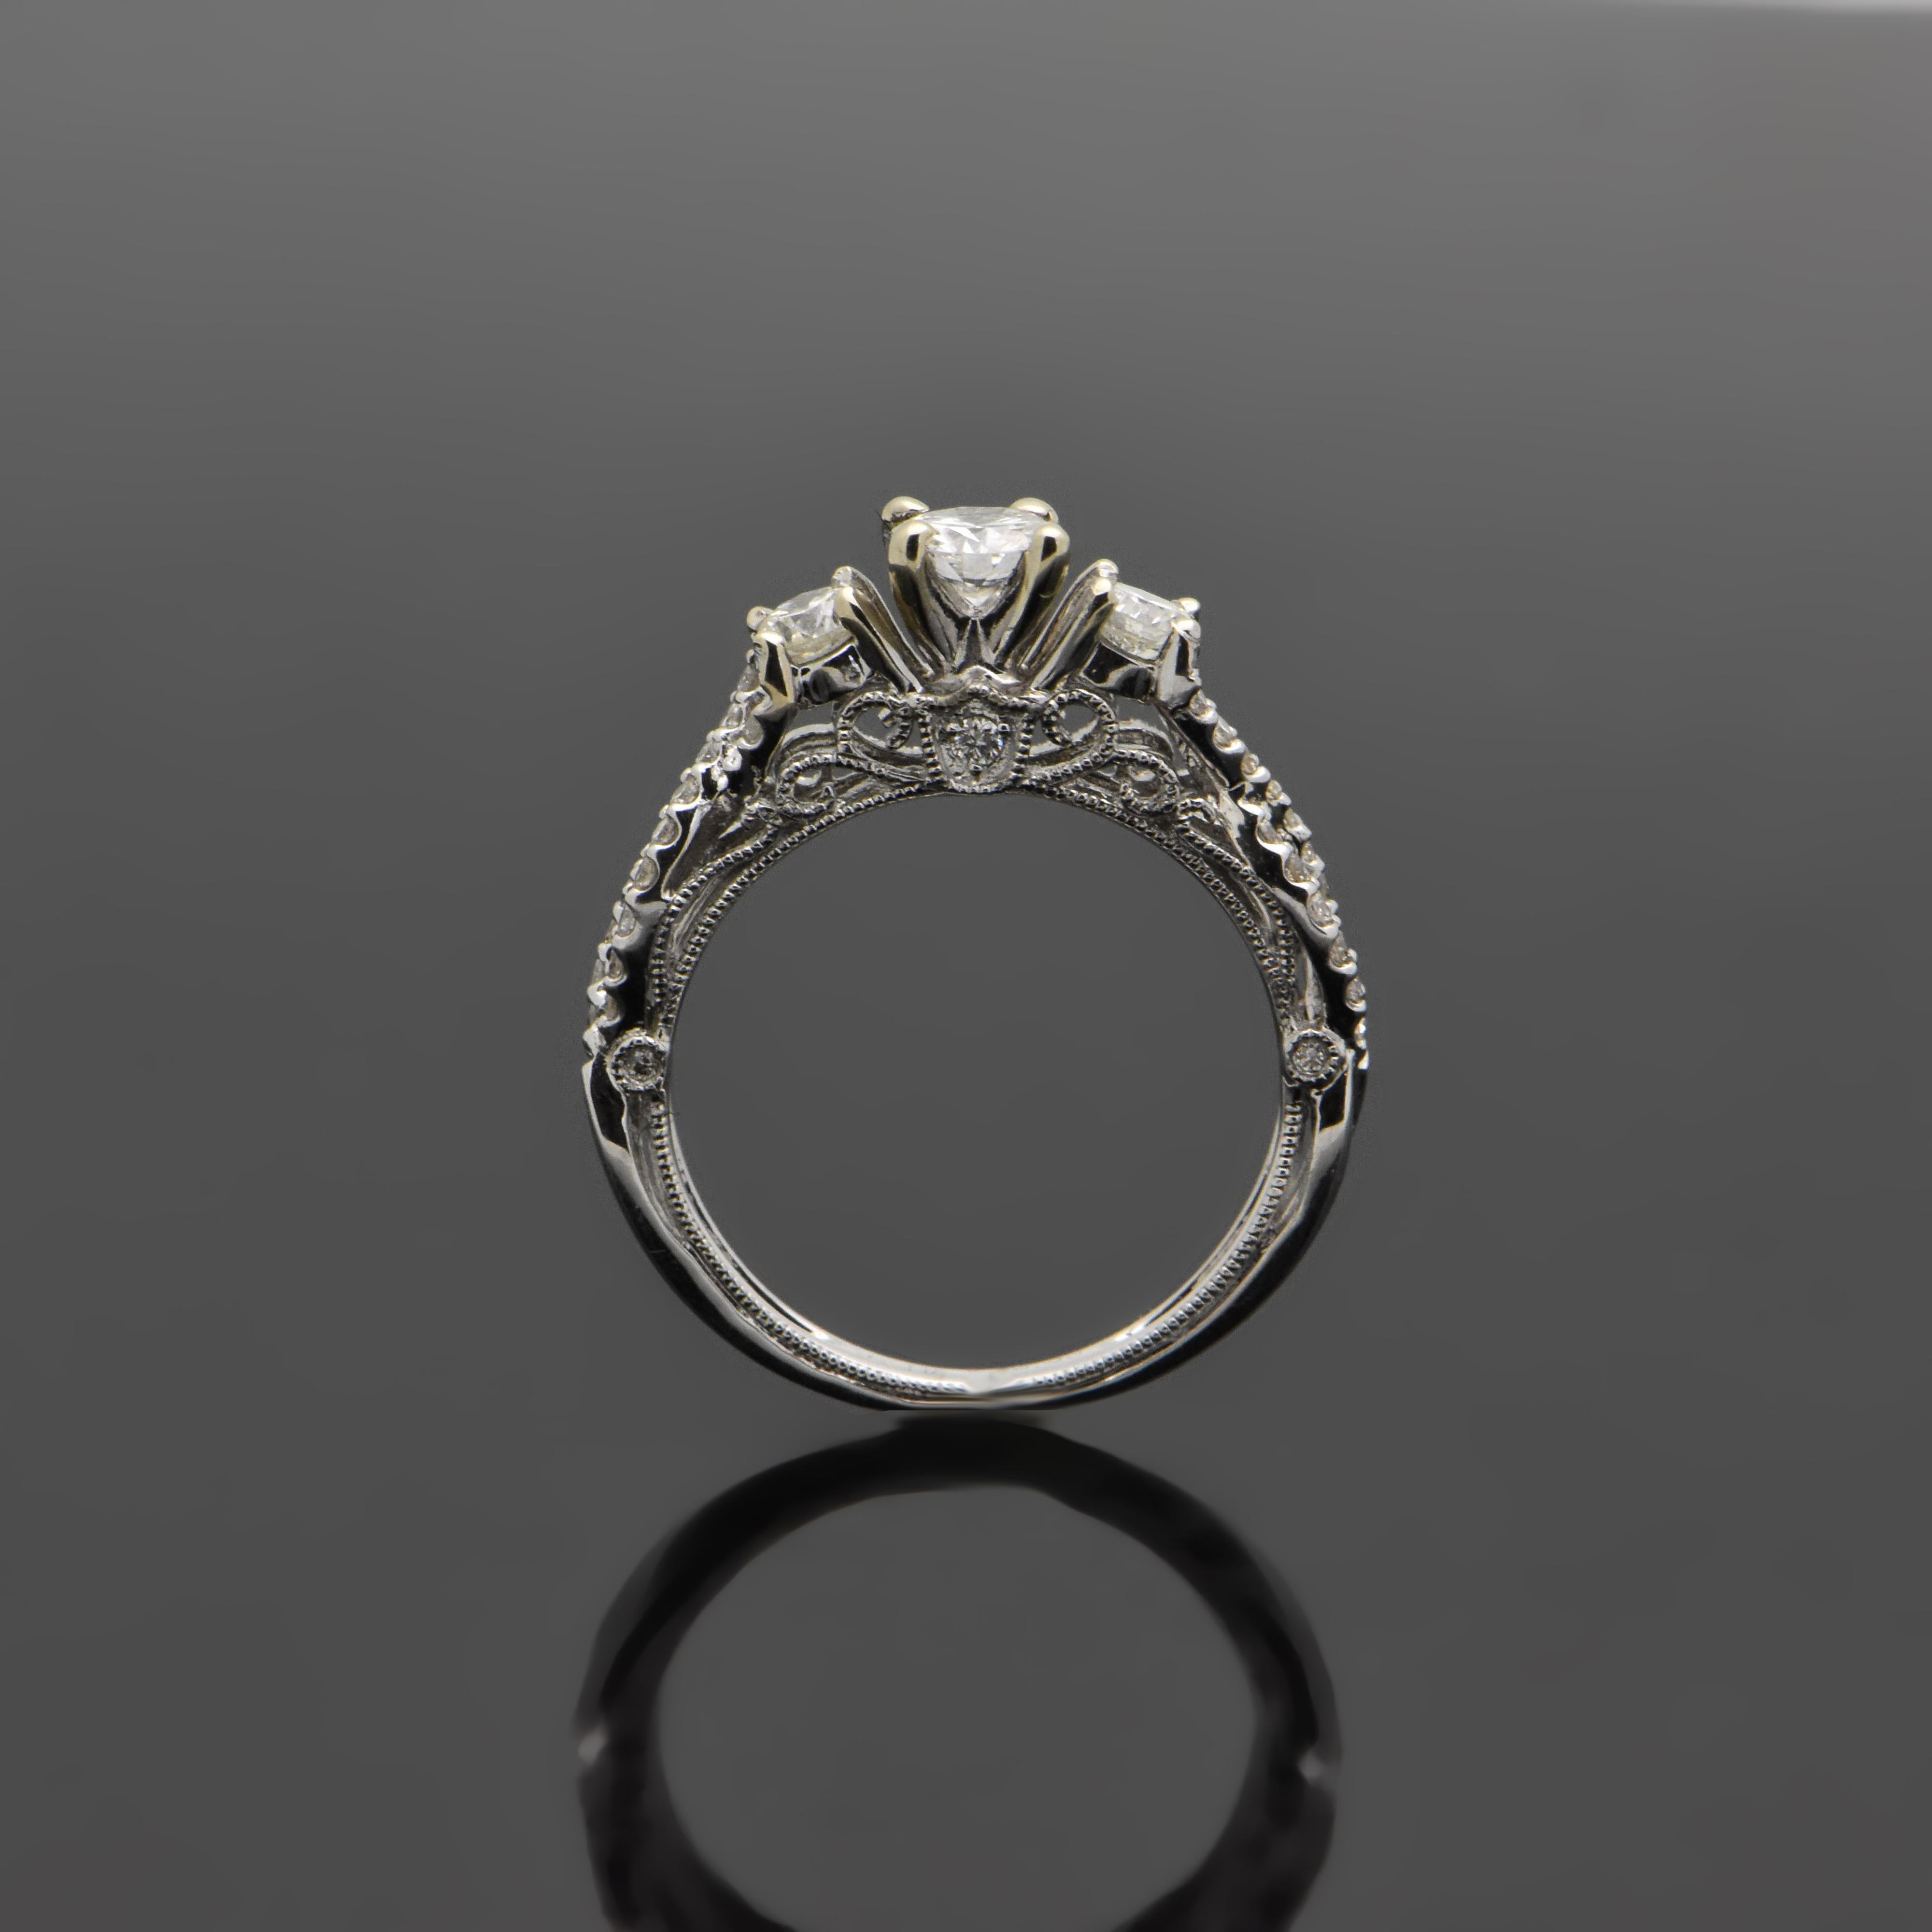 A 14kt White gold ring with a center diamond estimated at 0.33ct. and surrounding diamonds estimated at 0.56cttw. The setting features an infinity design with beautiful miligran details. Estimated weight of gold is 3 gr. 

We will size it for you.

